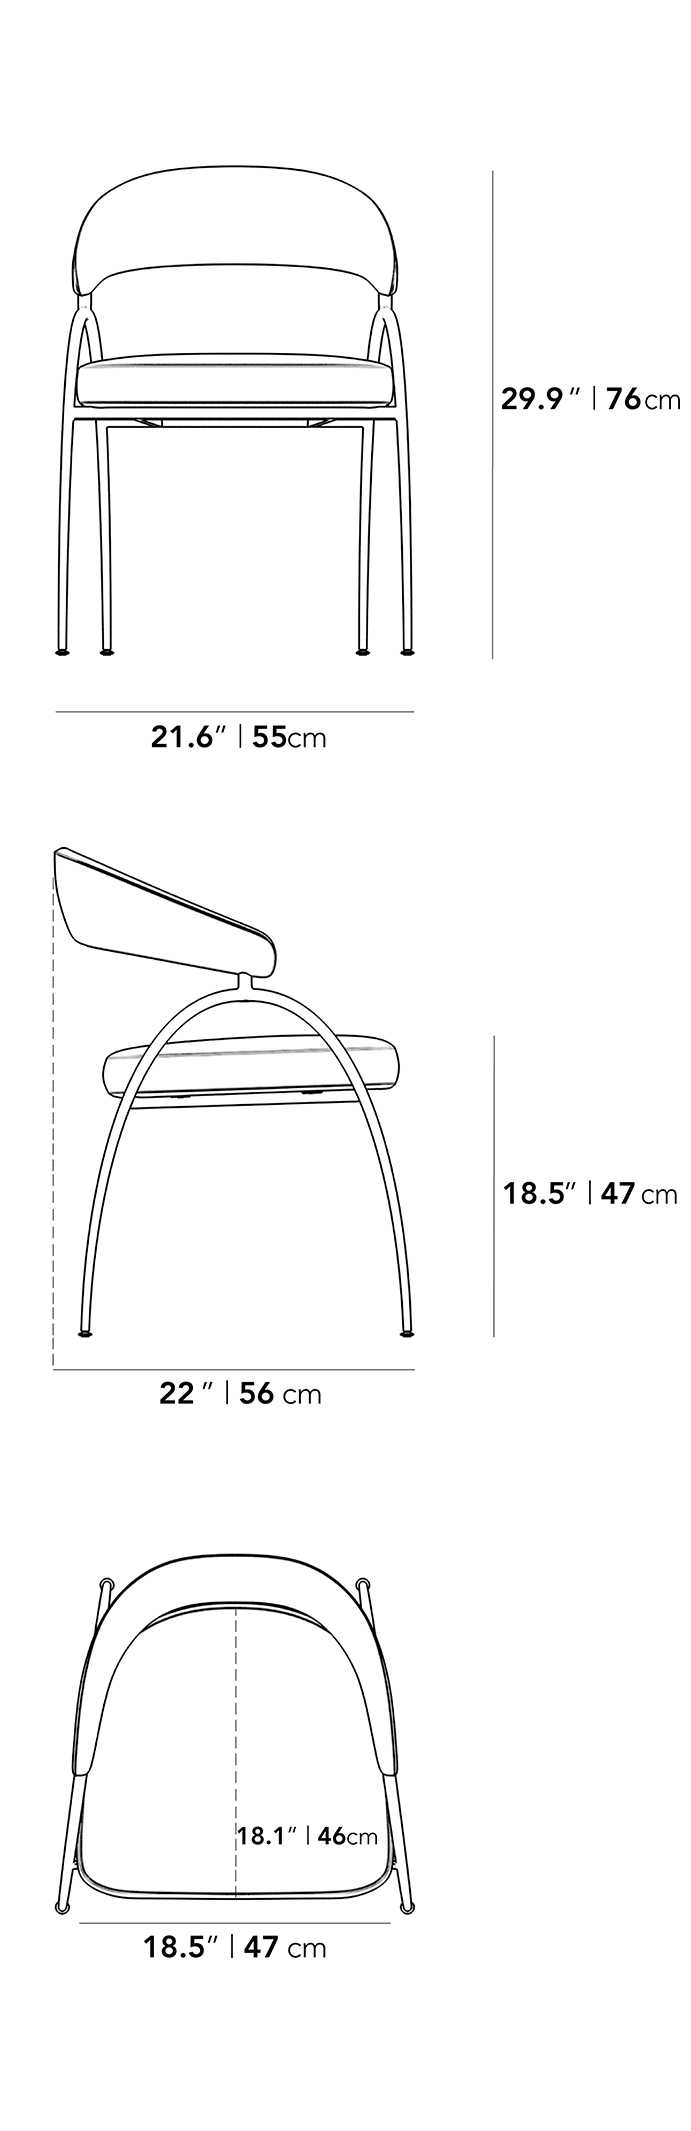 Dimensions for Uma Dining Chair